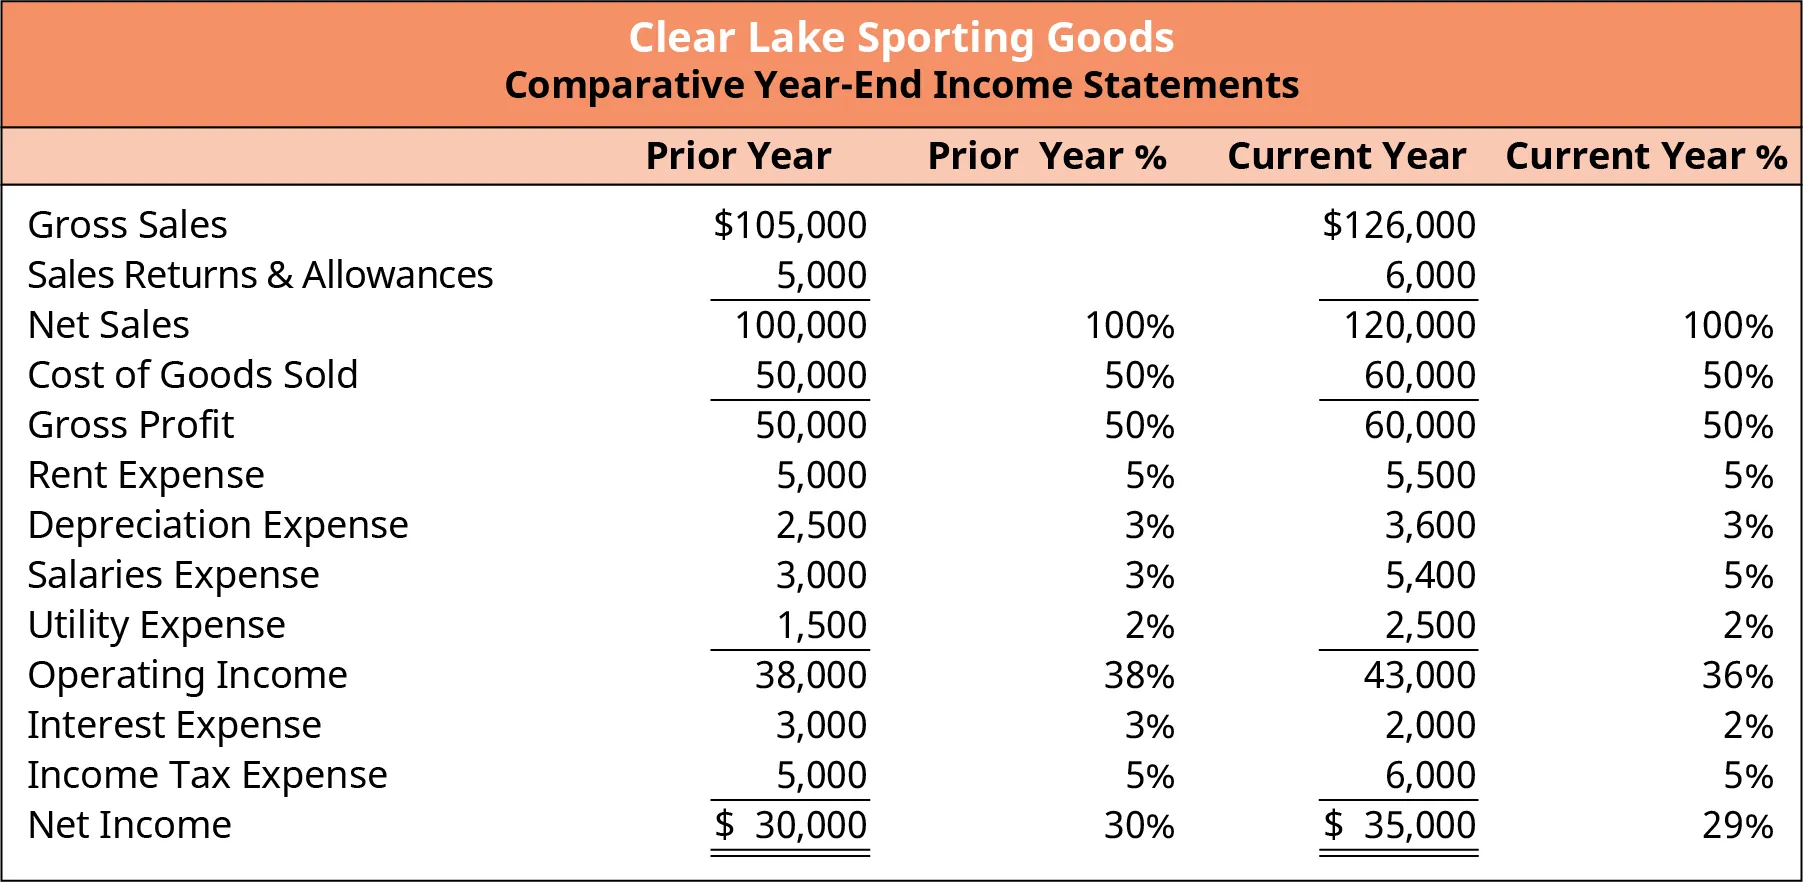 Common-Size income statement for Clear Lake Sporting Good. It shows the percentage figures of various assets and liabilities against the total assets and total liabilities for the prior and current years. The percentage for most items remained the same year over year. However, the salaries expense rose, both in dollars and percentage. In the prior year, salaries expense was $3,000, representing 3% of the prior year. In the current year, salaries expense is $5,400, representing 5%.